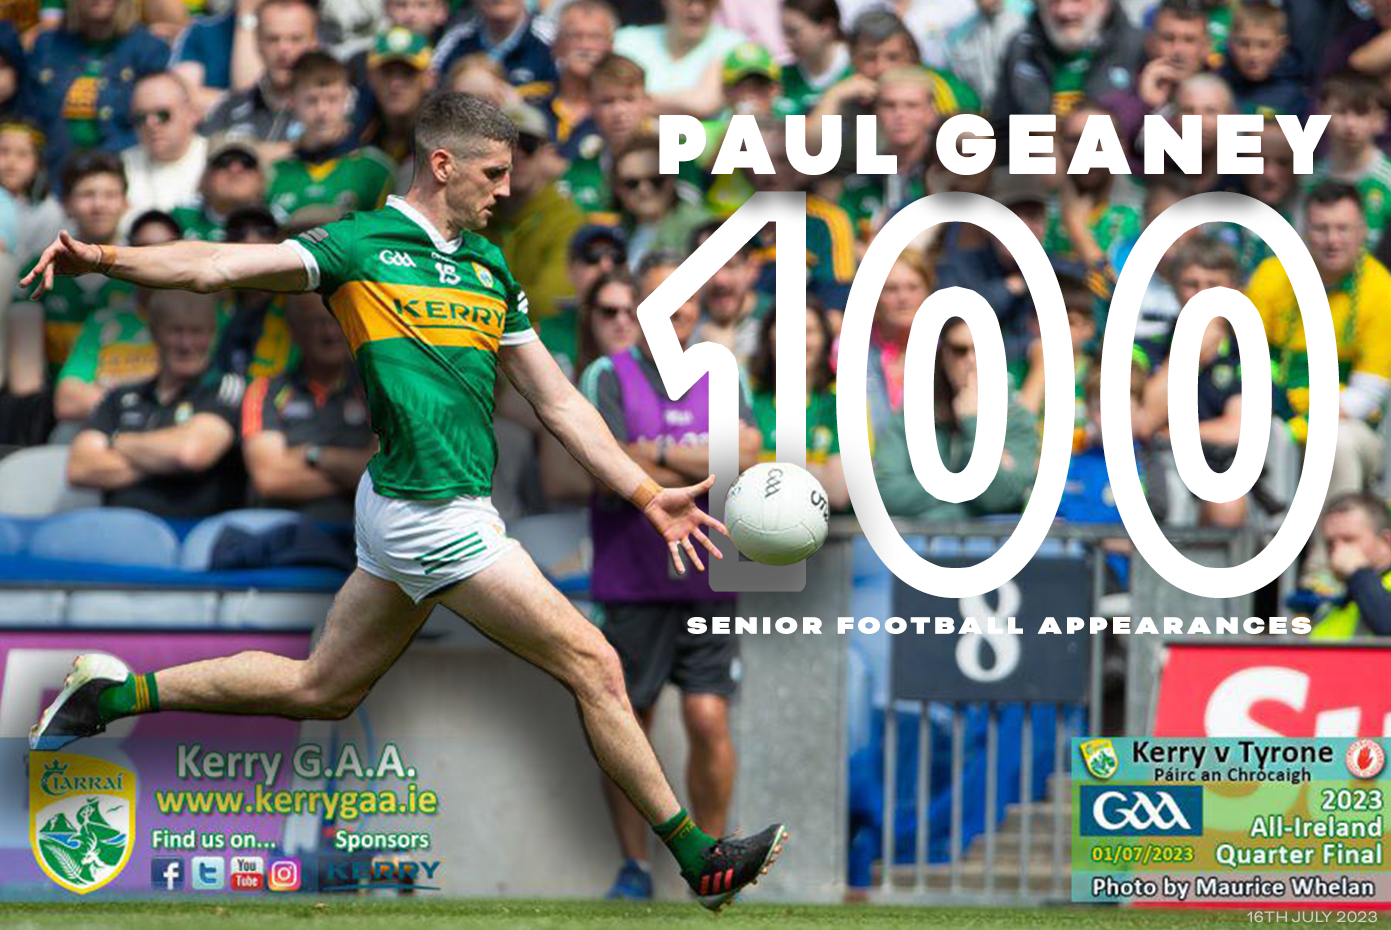 Paul Geaney – 100th Appearance